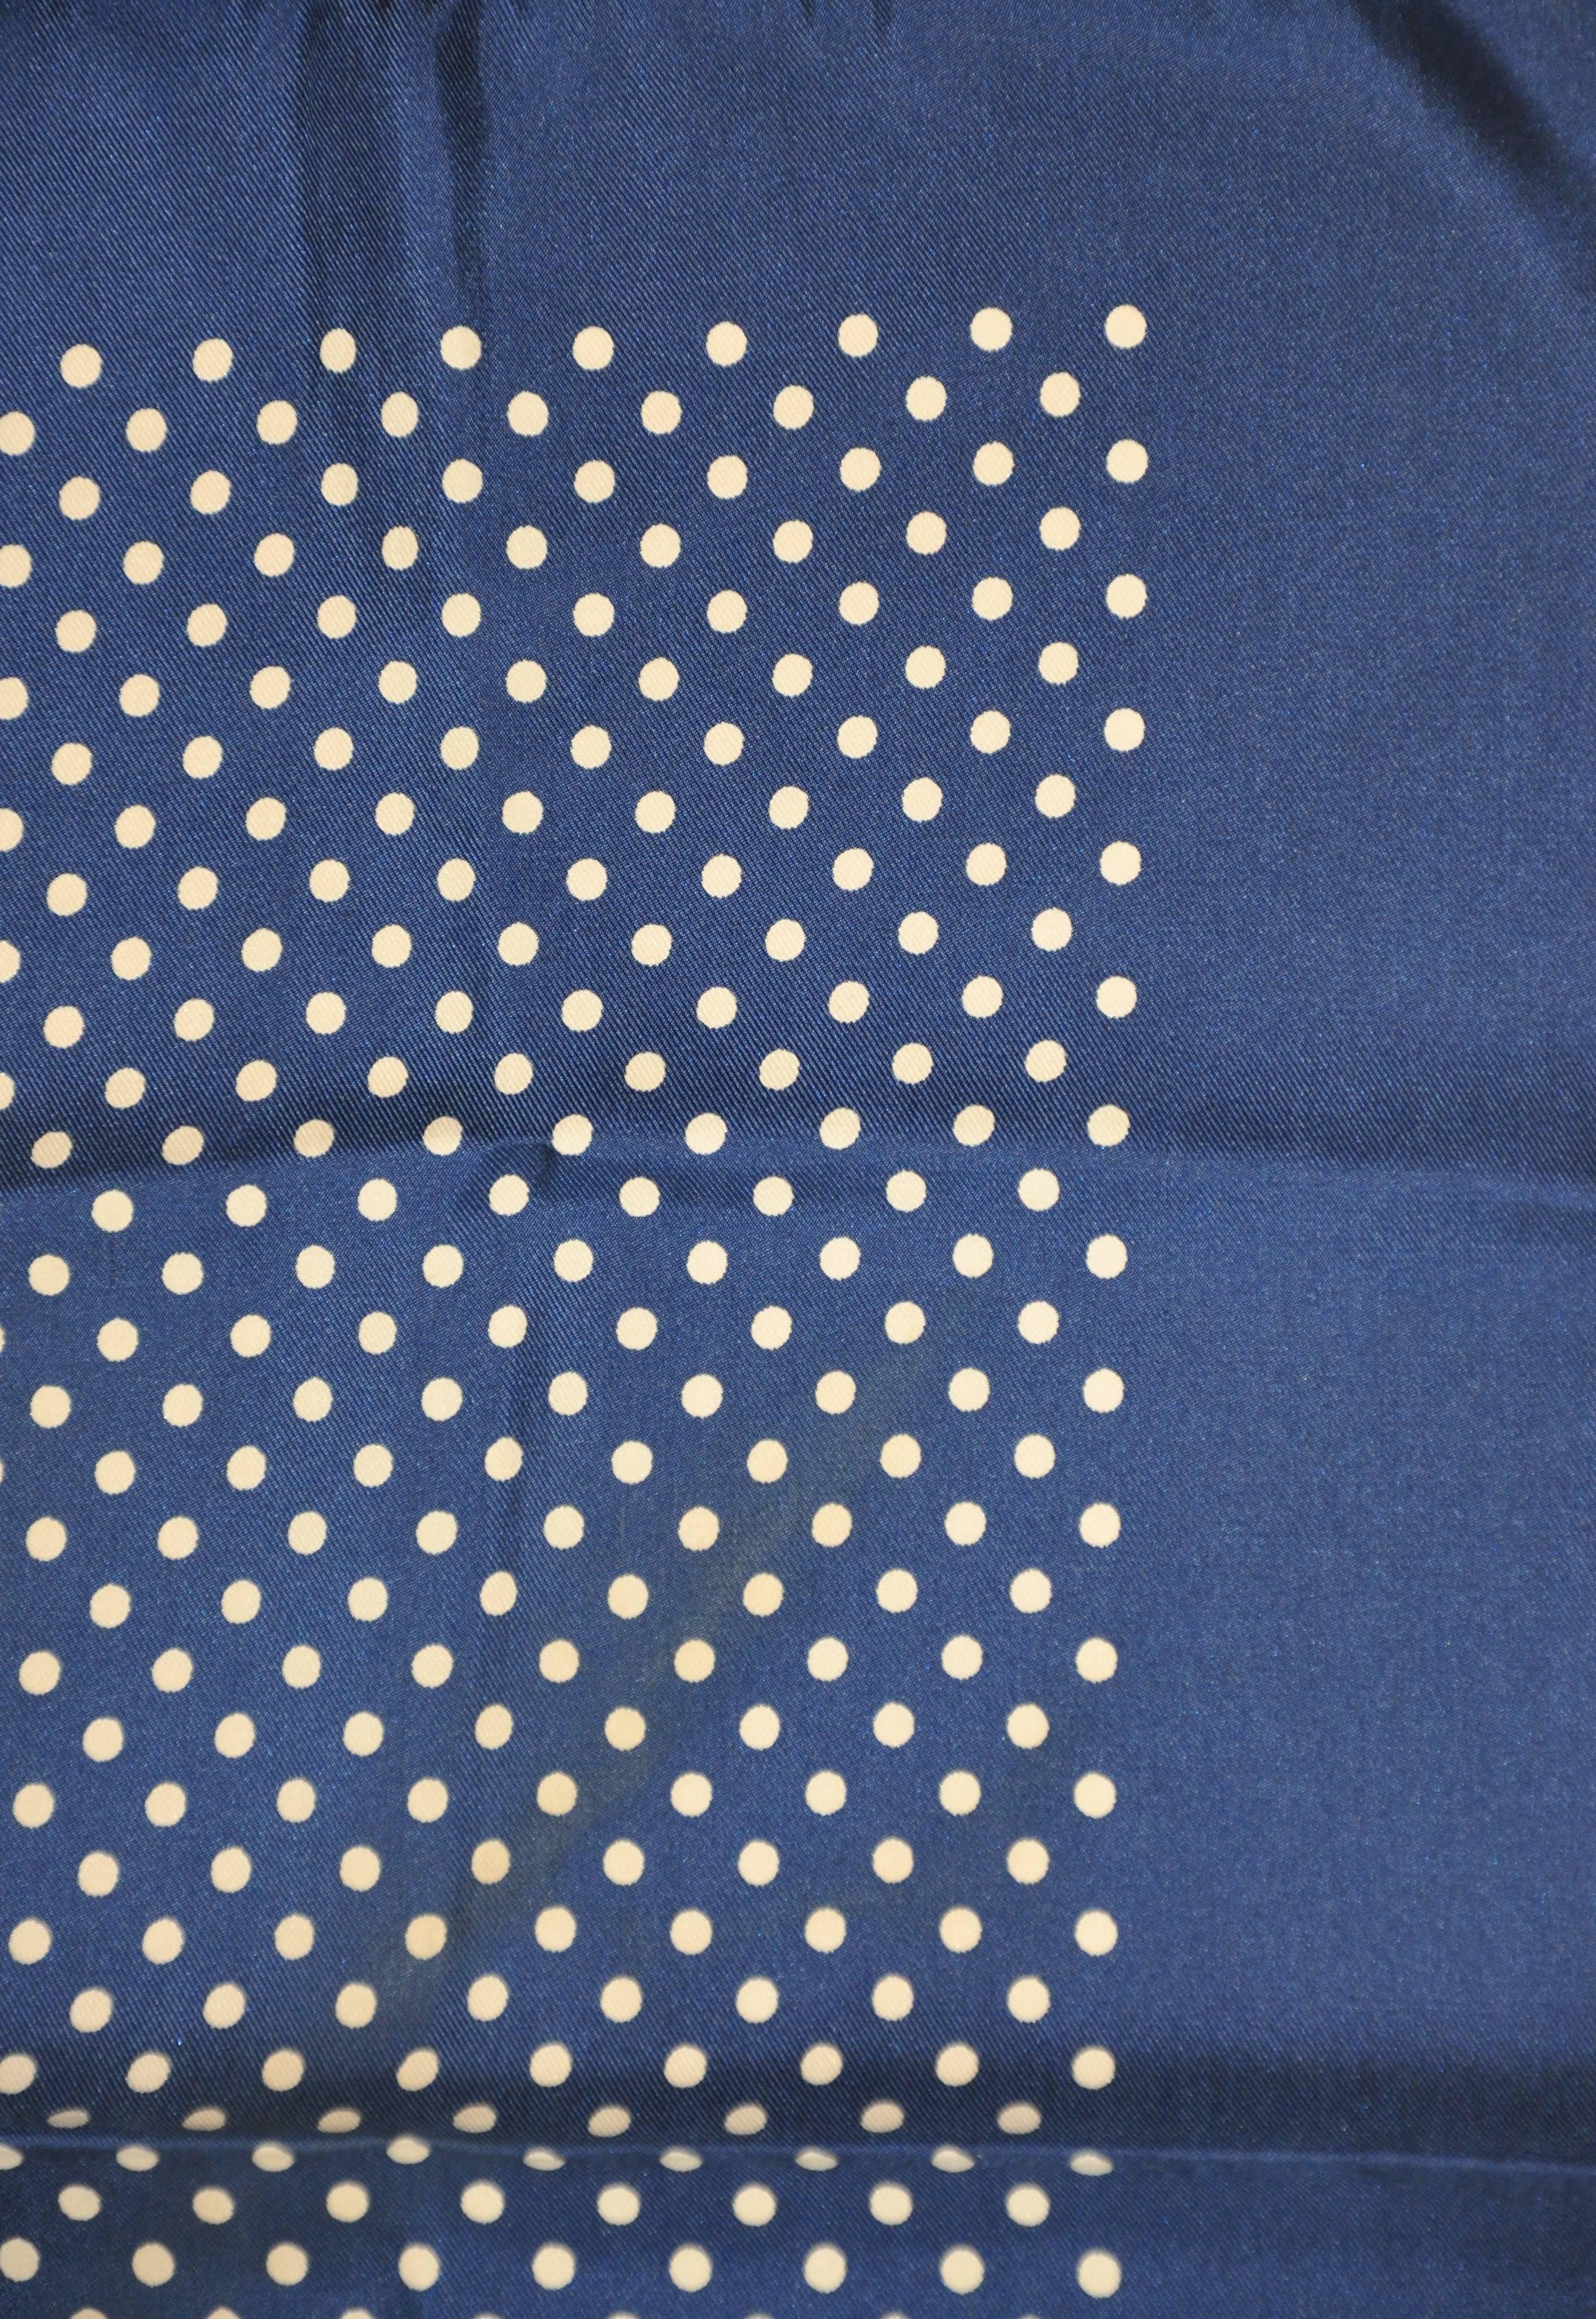 This wonderful classic navy & cream polka dot silk handkerchief measures 18 1/2" x 18 1/2", finished with hand-rolled edges. Made in Italy.